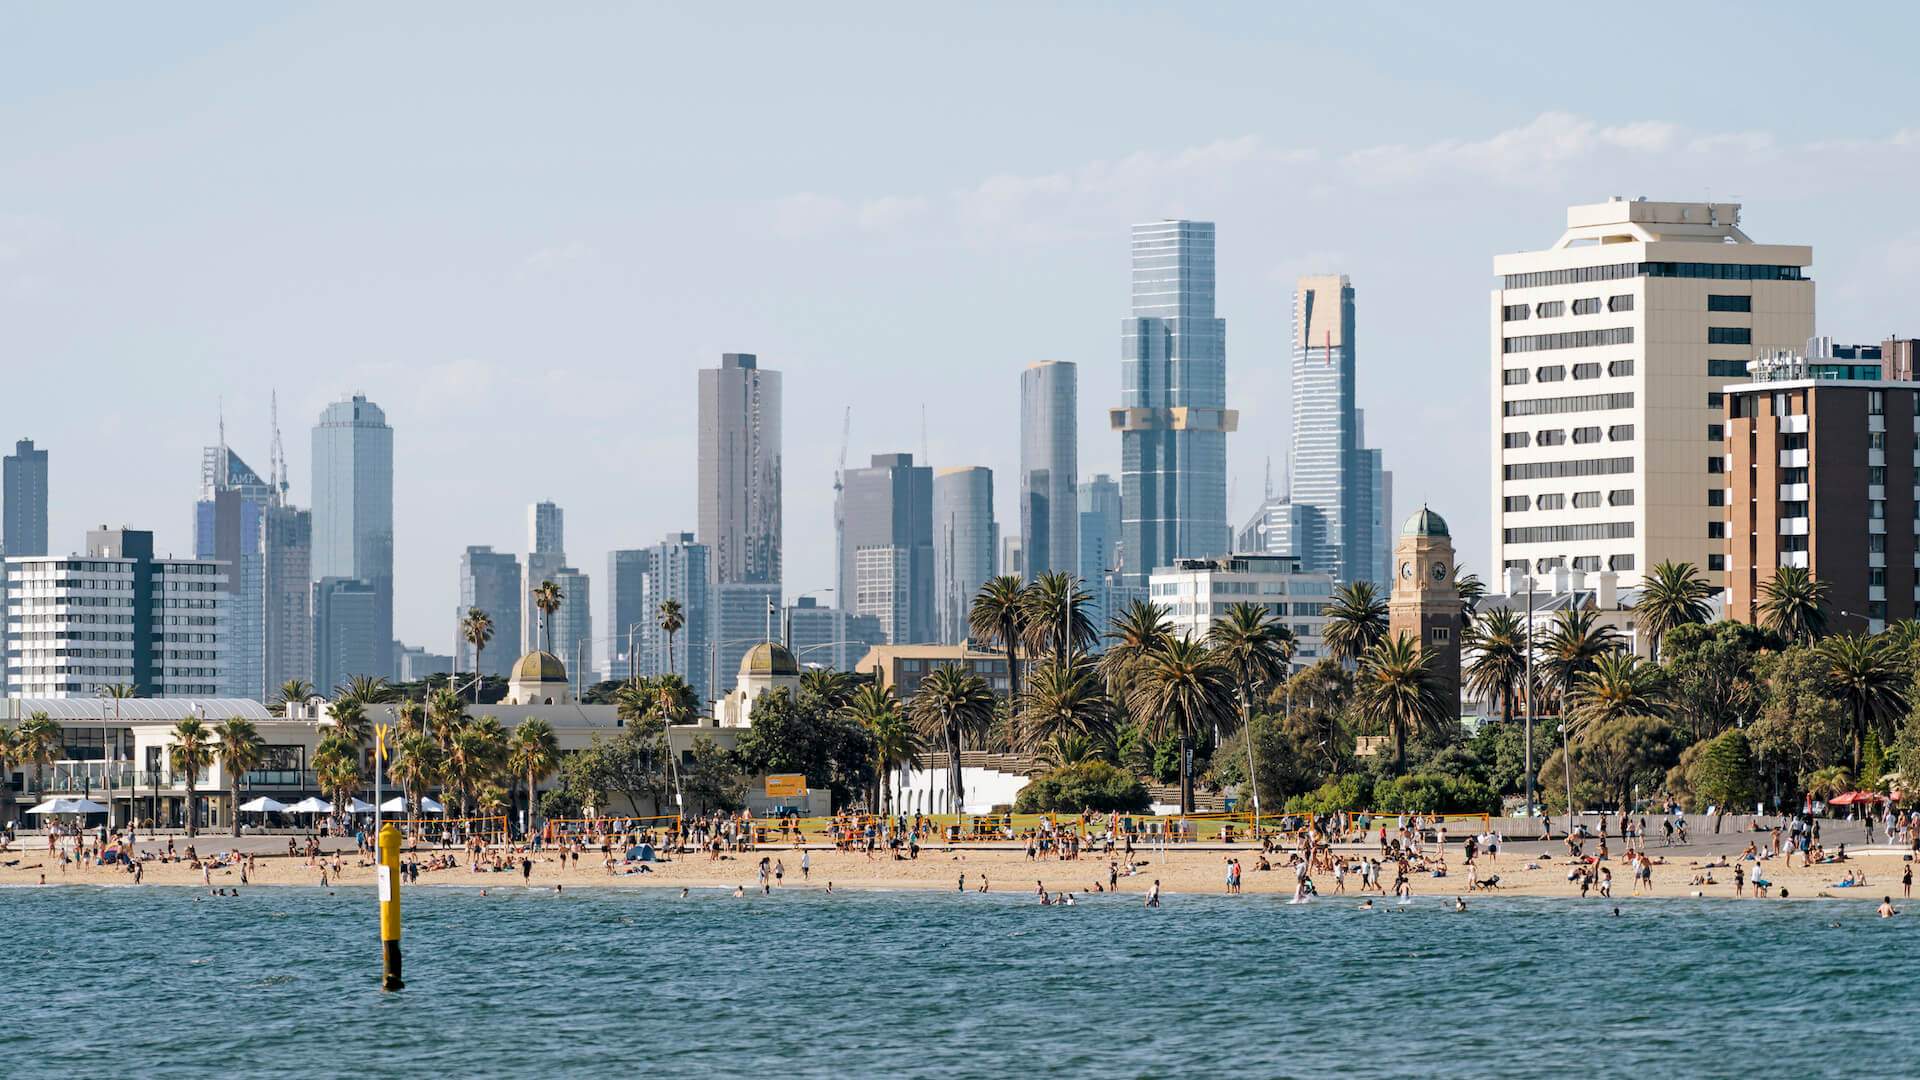 St Kilda Beach - one of the best beaches in Melbourne